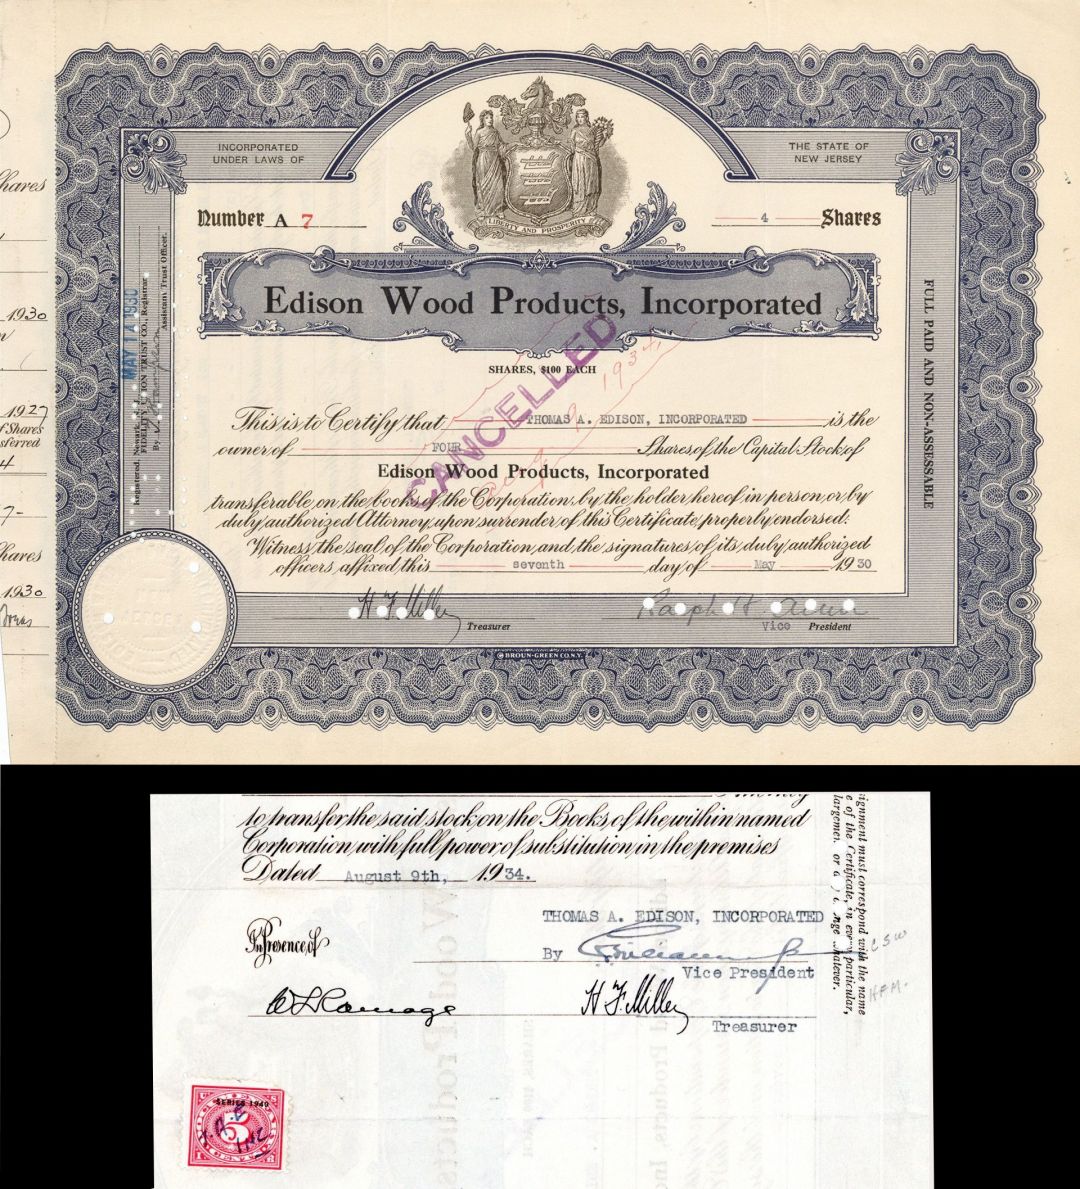  Edison Wood Products, Inc. Issued to Thomas A. Edison, Incorporated - Stock Certificate